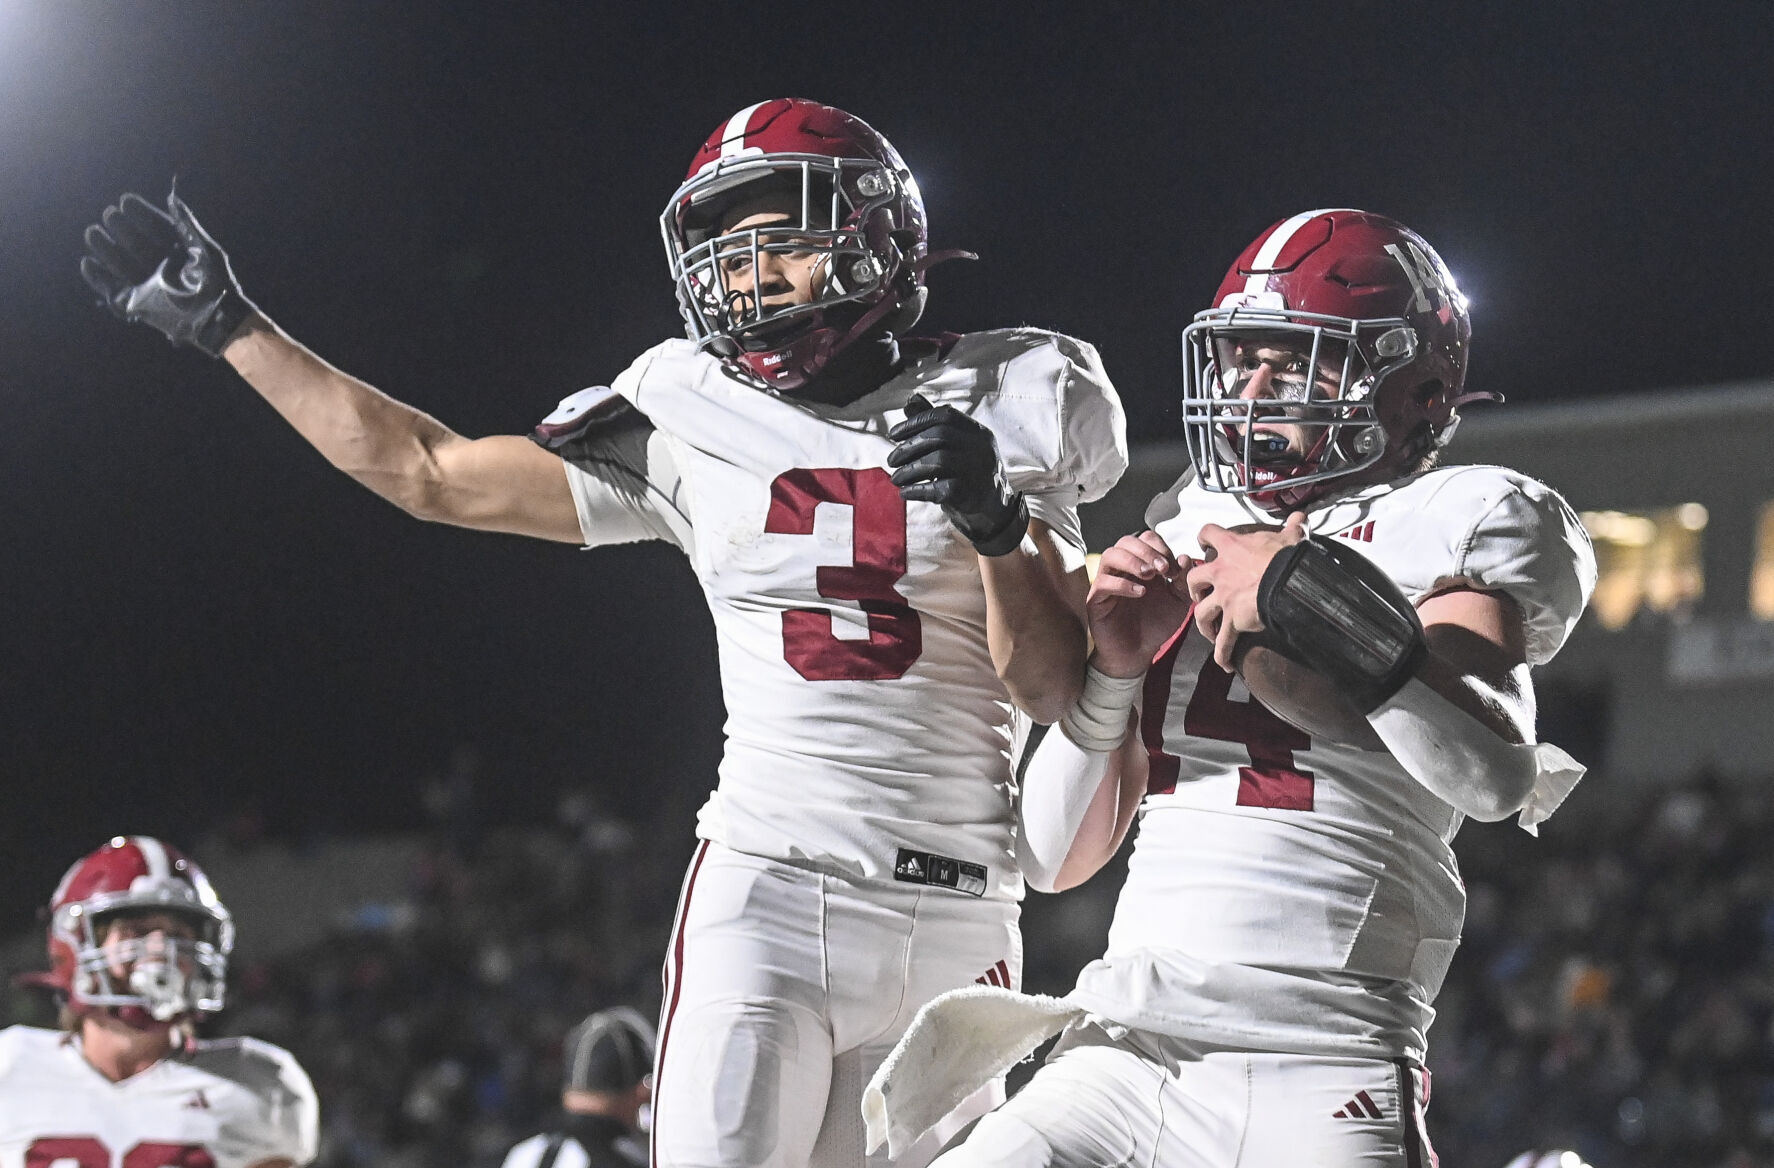 High School Football Playoffs: 208 Teams Compete in Seven Classifications, Highlights include Hartselle’s Deep Run and Austin’s Quest for First 7A Playoff Win